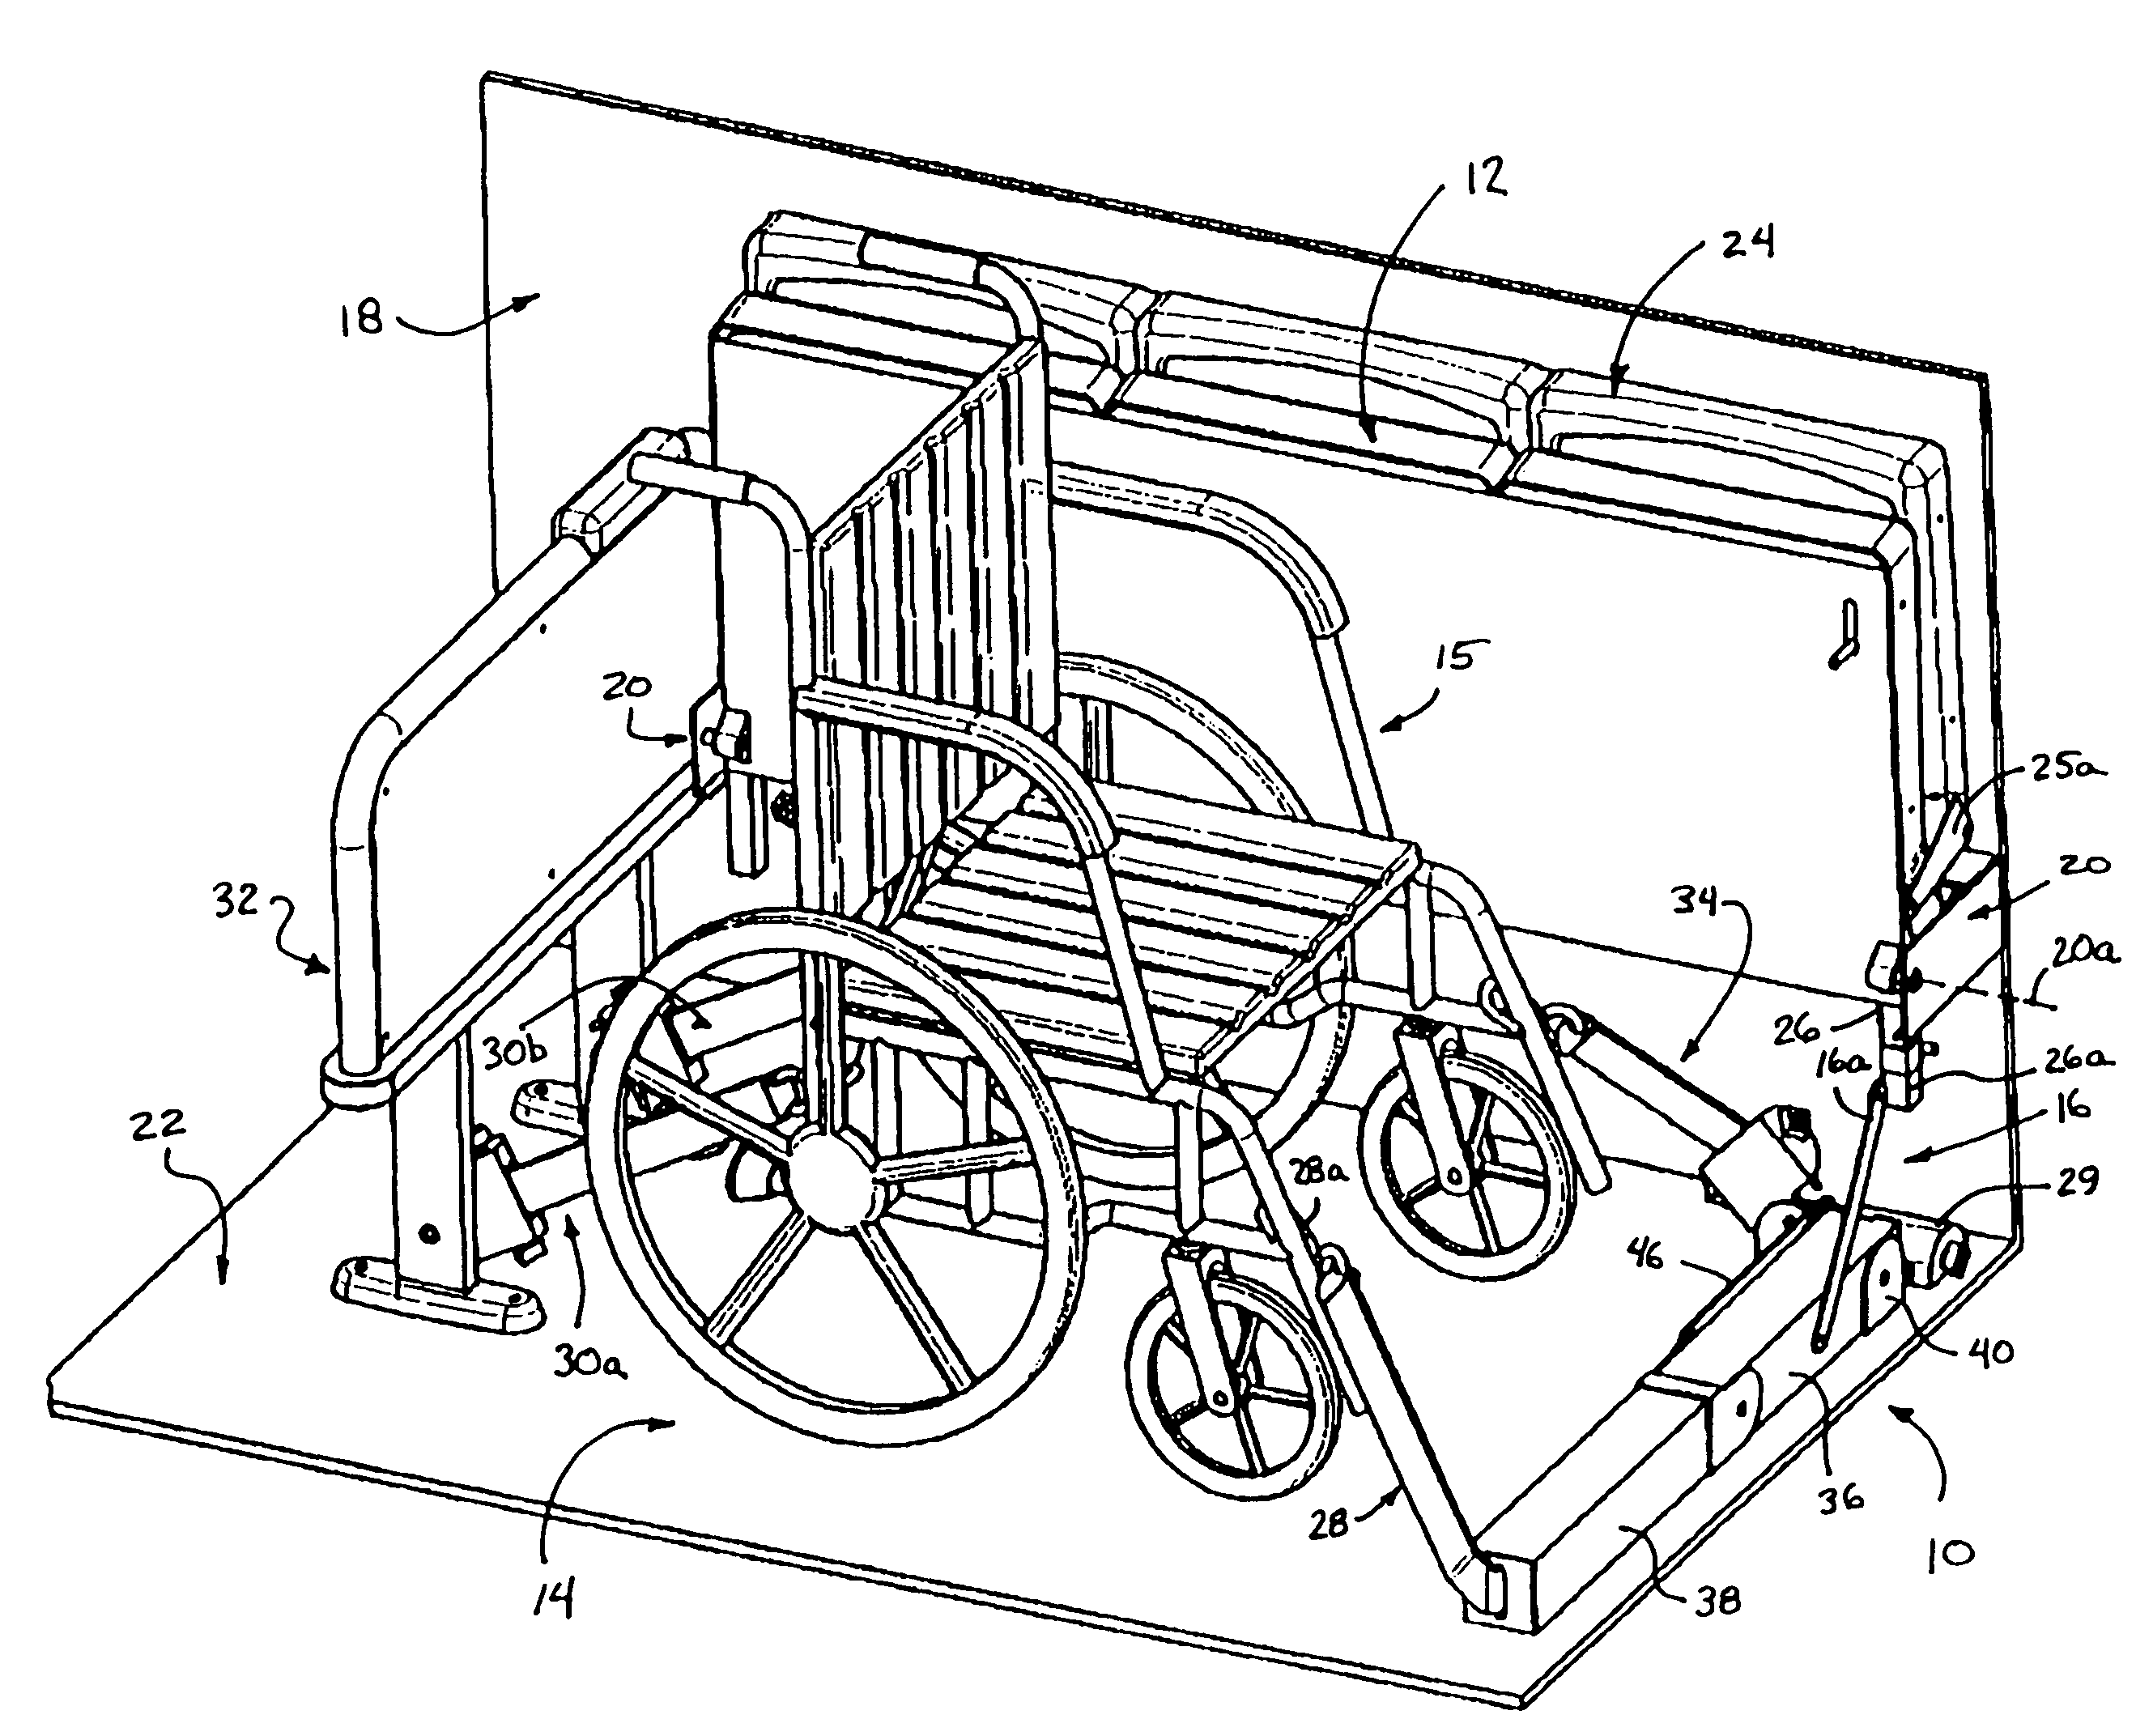 Wheelchair holding device